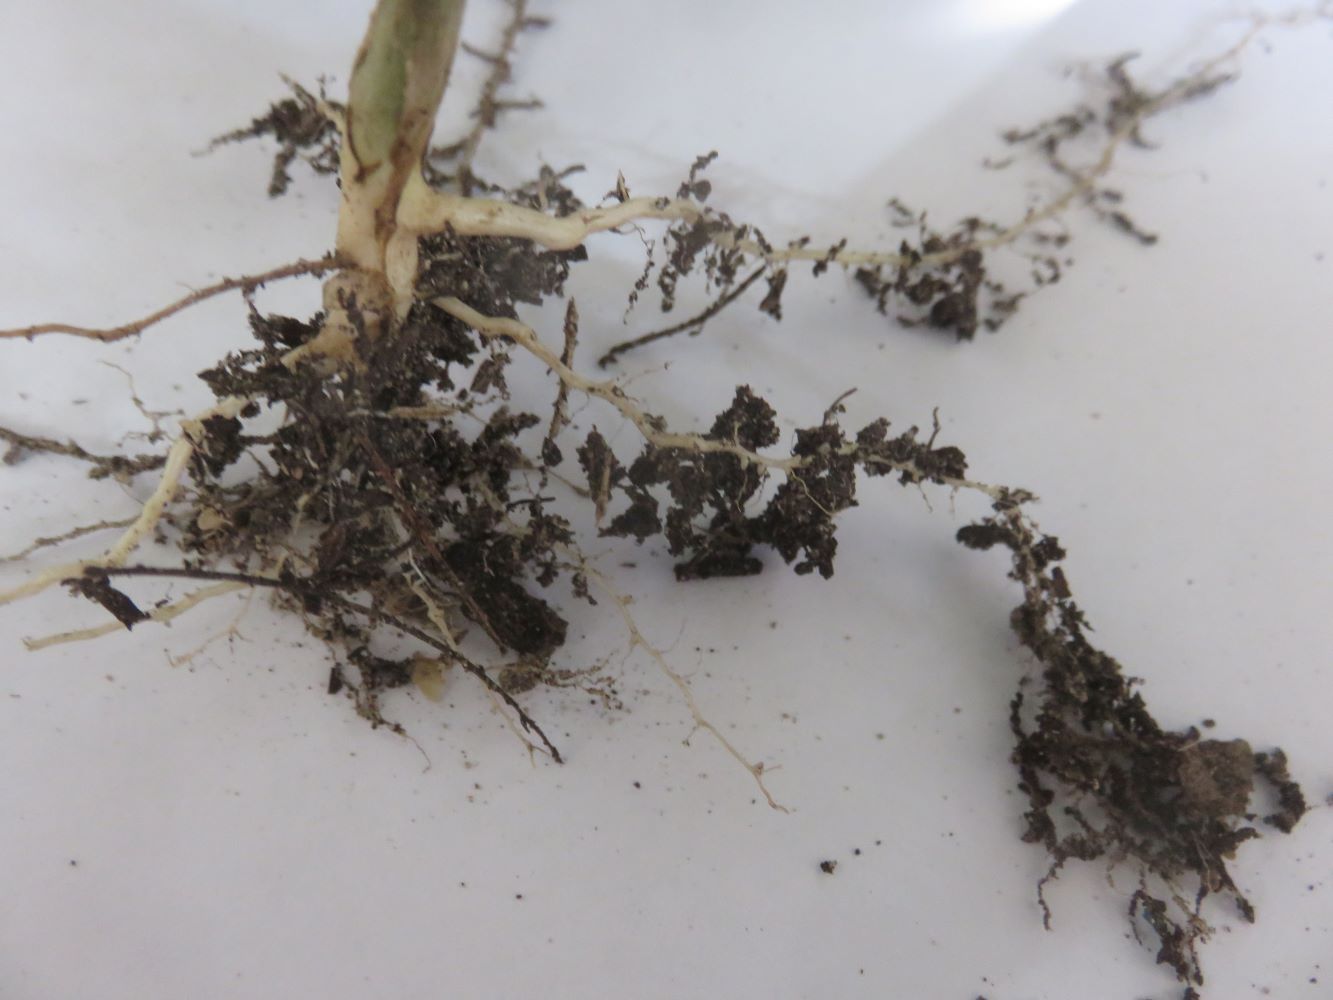 The beginnings of aggregate formation on the roots of one of my cover crop seedlings.